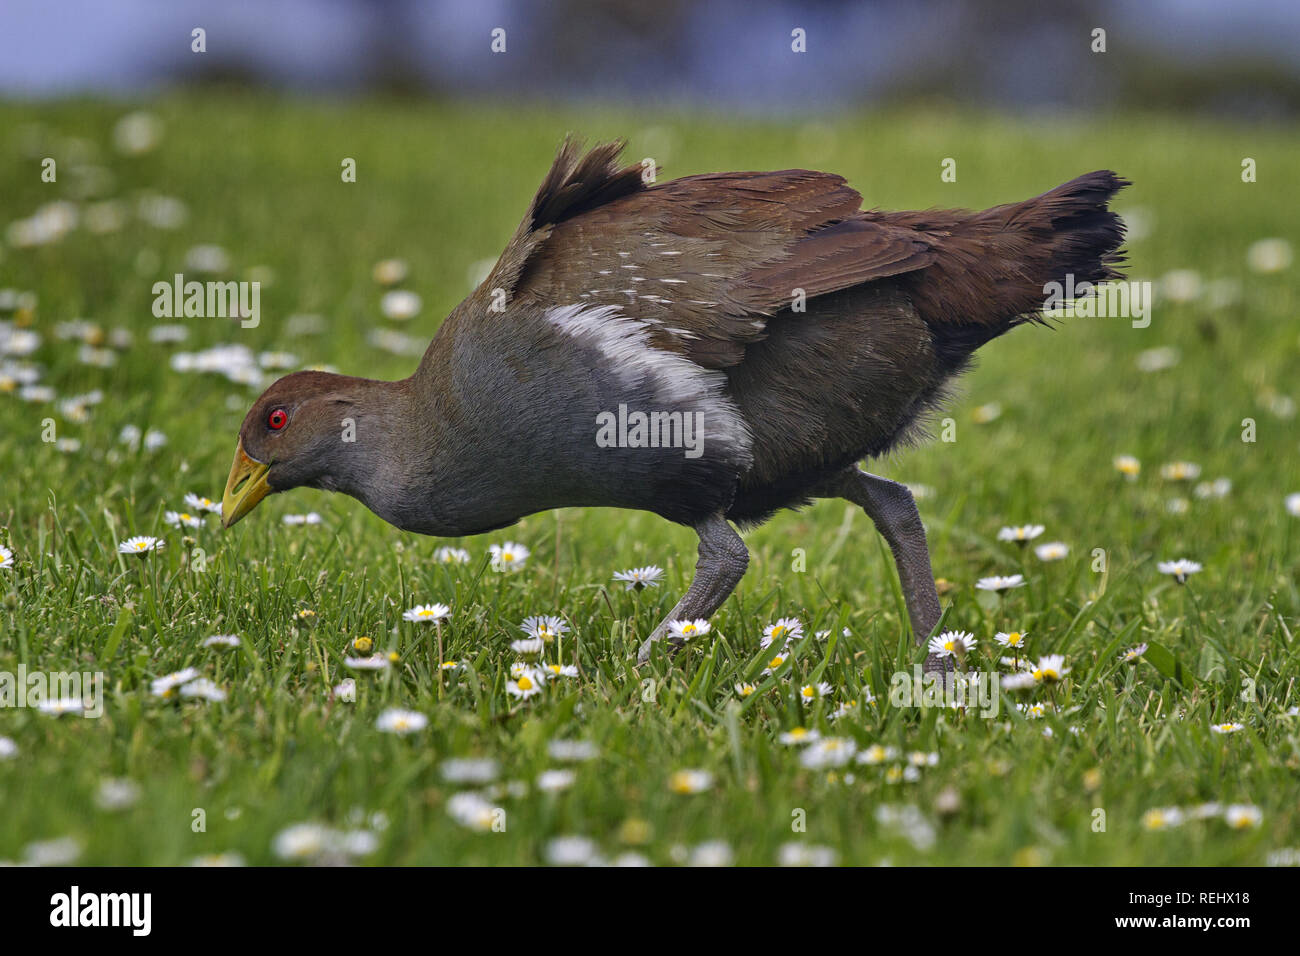 Adult Tasmanian Native Hen, an endemic species to Australian state of Tasmania, with blade of grass in beak in field of white daisies. Stock Photo